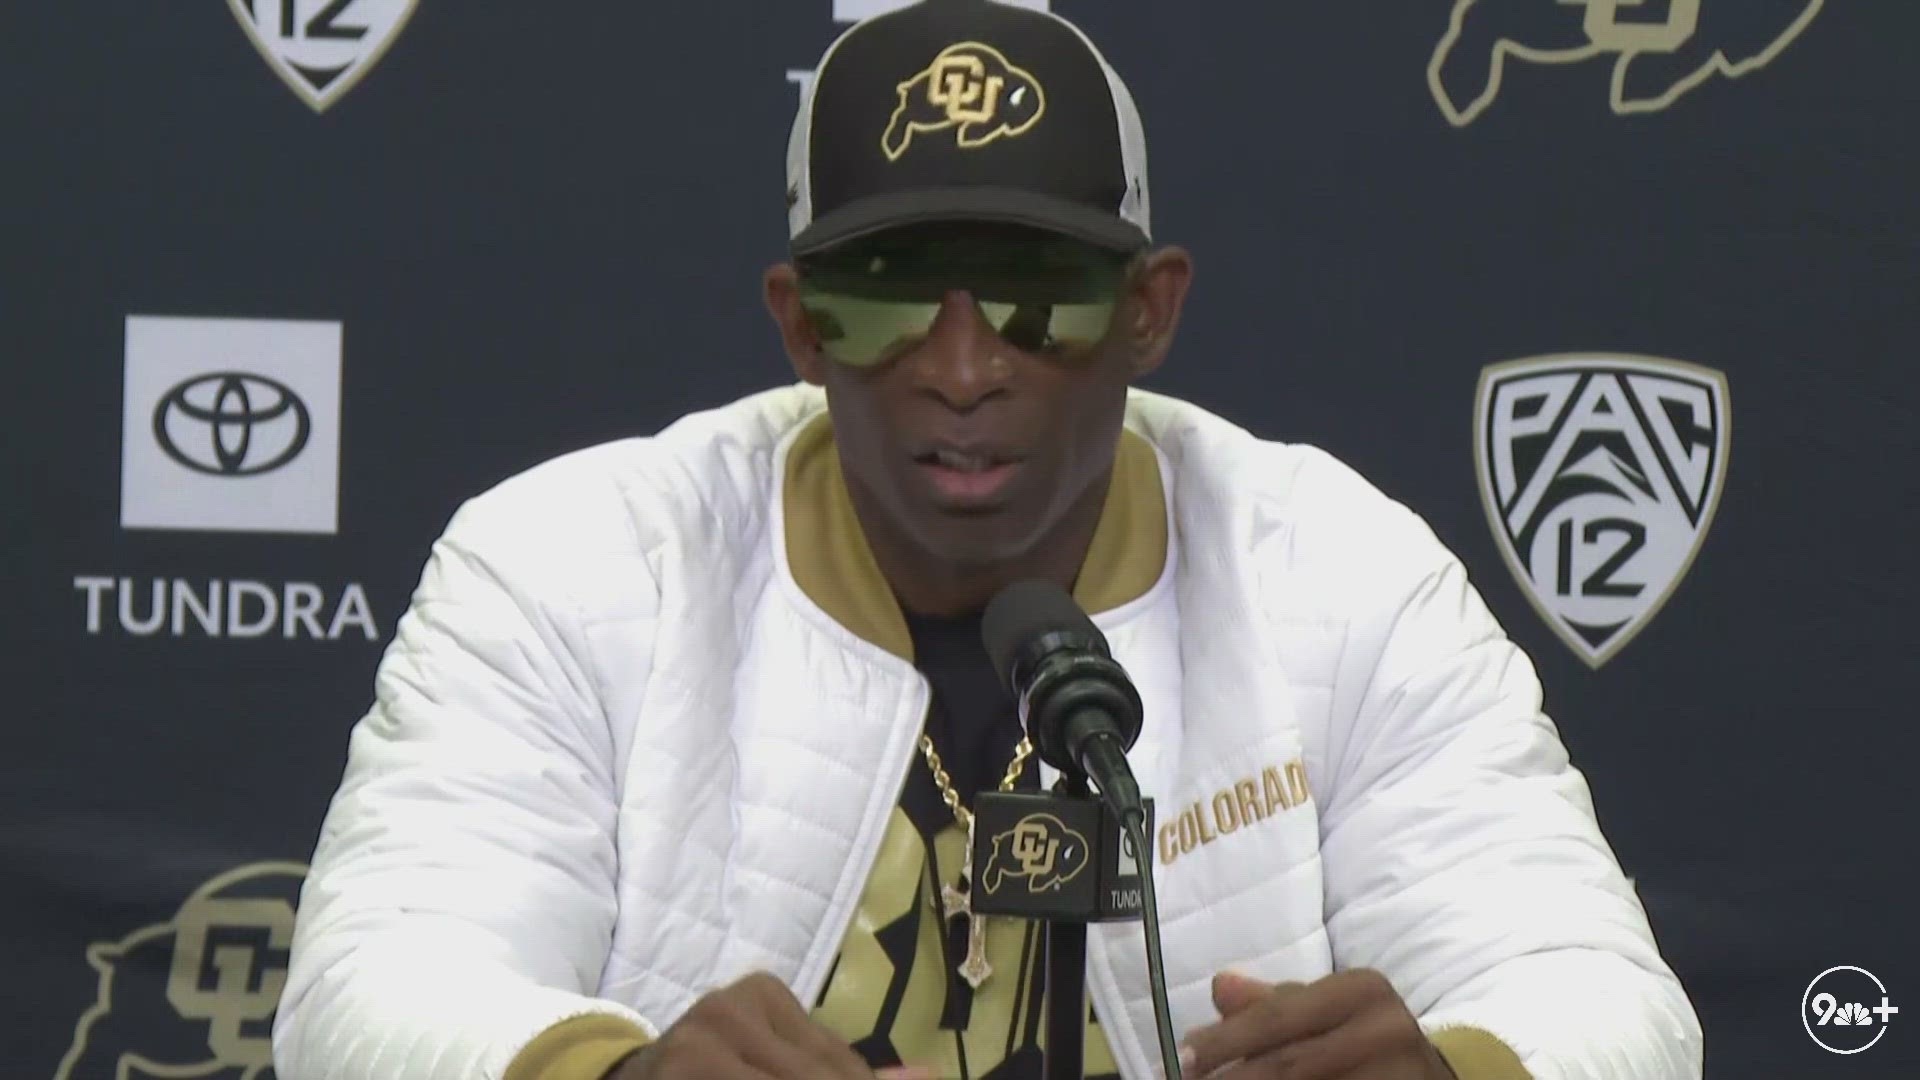 "That kid does not deserve that," Colorado coach Deion Sanders said at his weekly press conference Tuesday in Boulder.